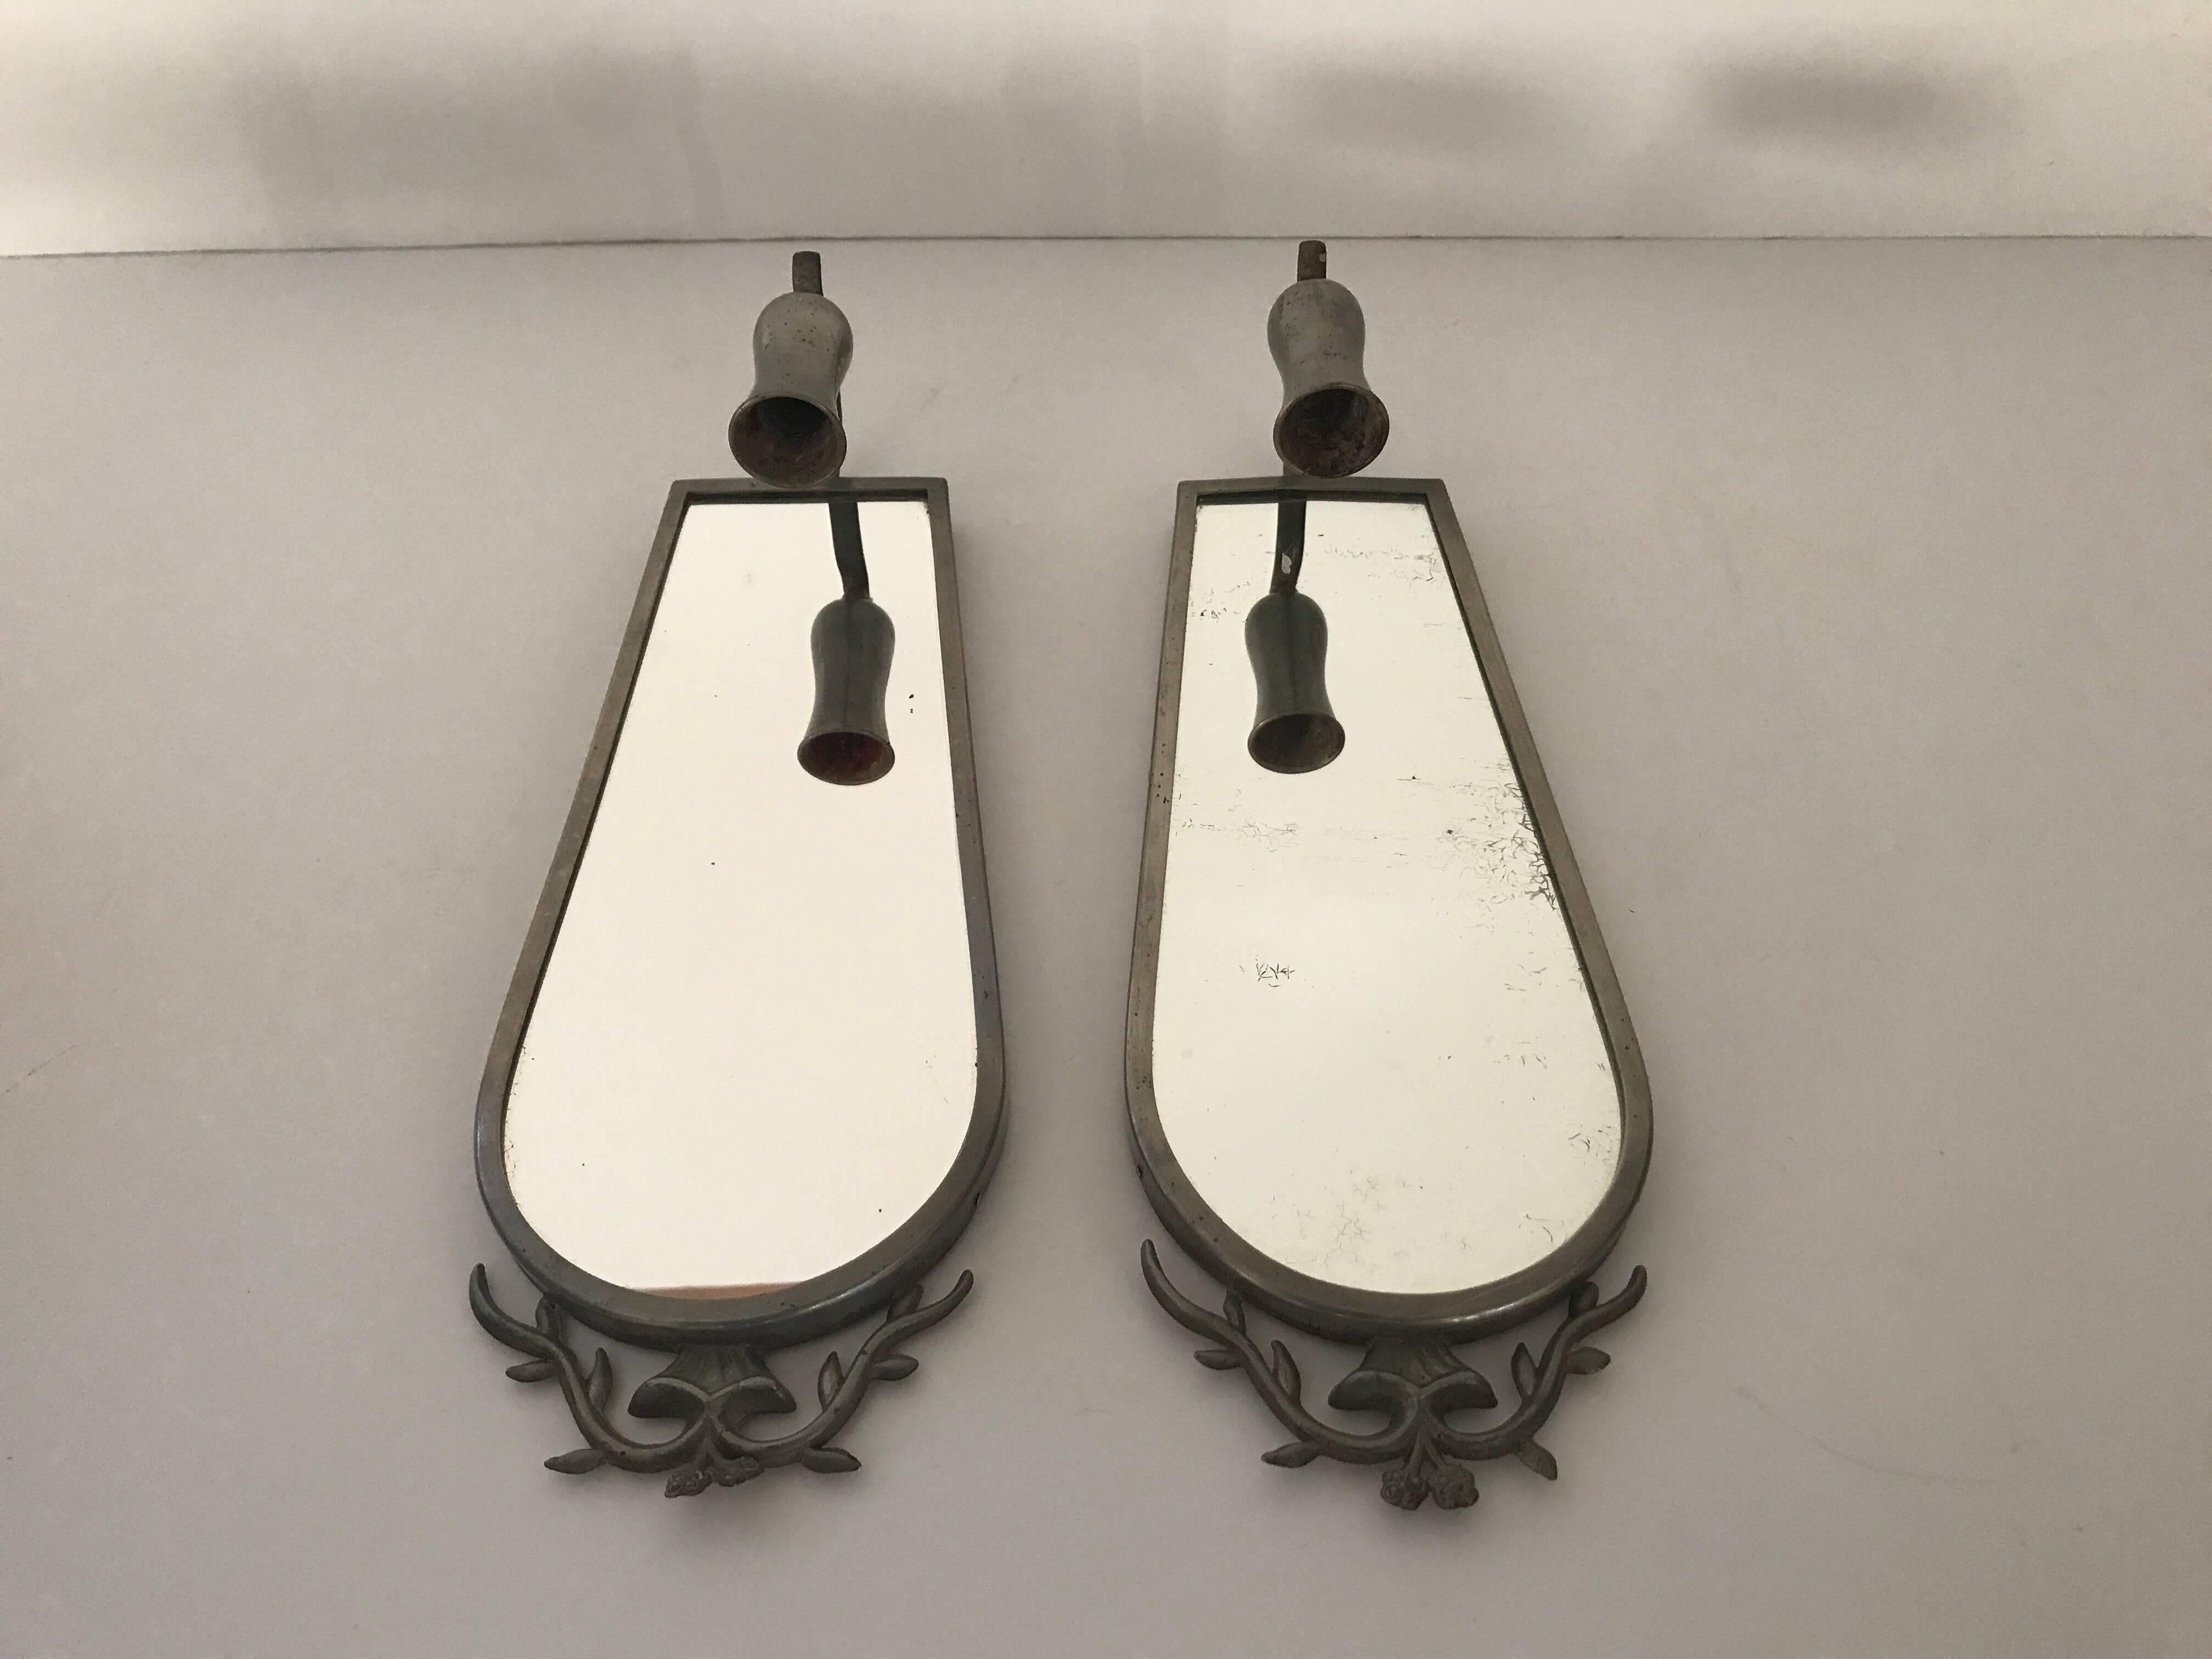 Pair of Swedish Grace pewter mirror candle sconces by Nils Fougsted Svenskt Tenn. A beautiful pair of high quality pewter mirror candle sconces made by Nils Fougstedt and for the high end manufacturer and store, Svenskt Tenn Stockholm. They are in a